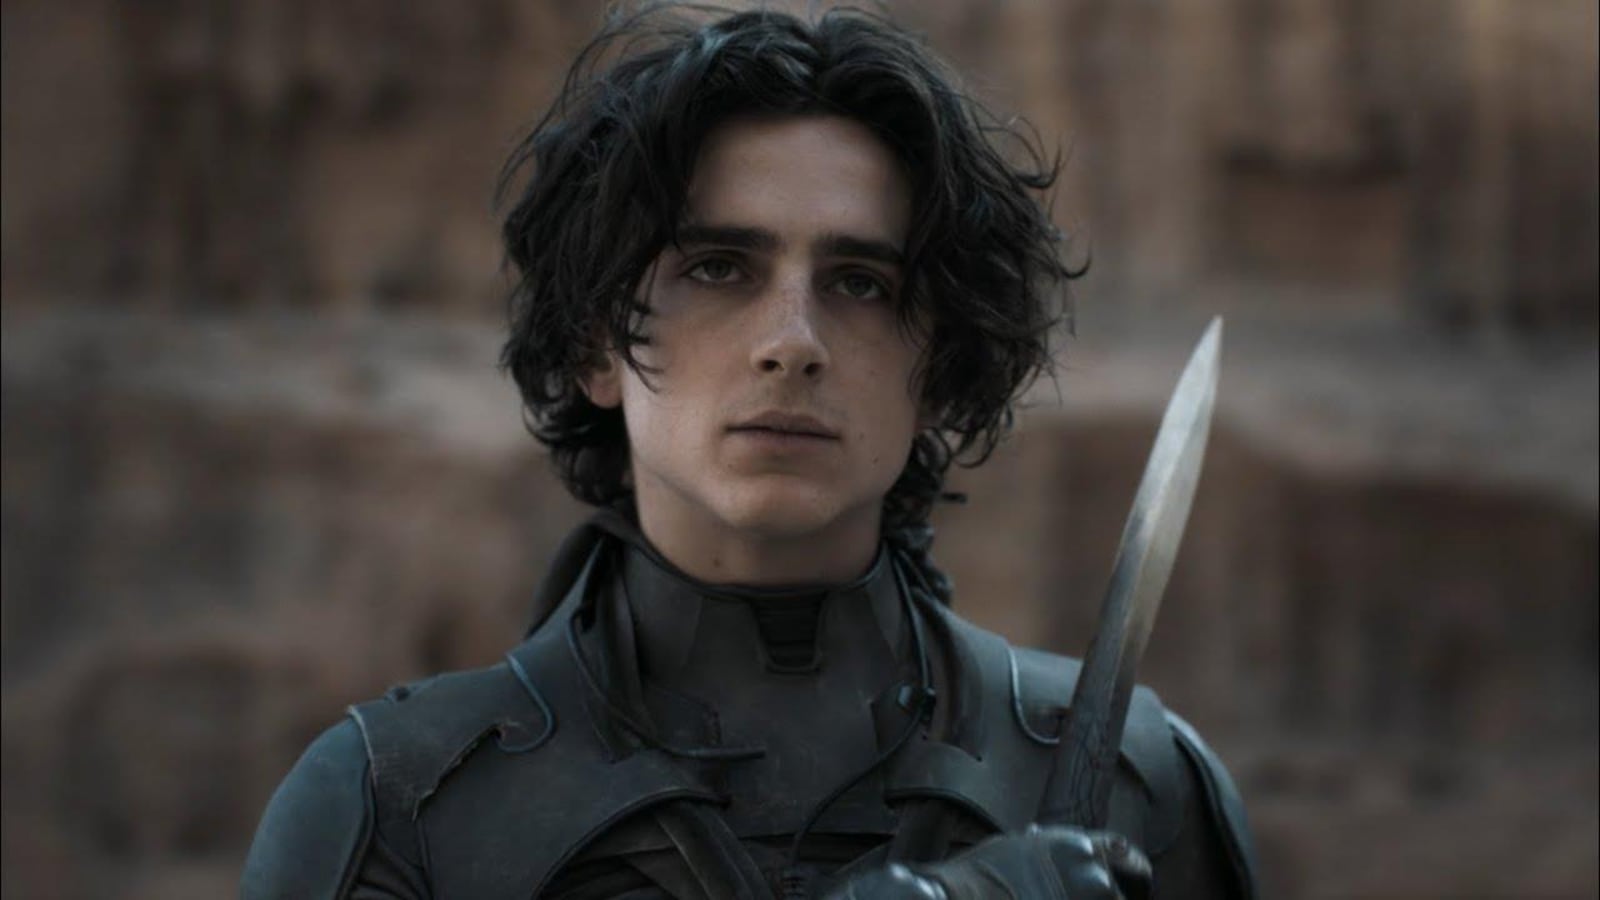 A young man (Timothée Chalamet) in combat gear and a dagger.